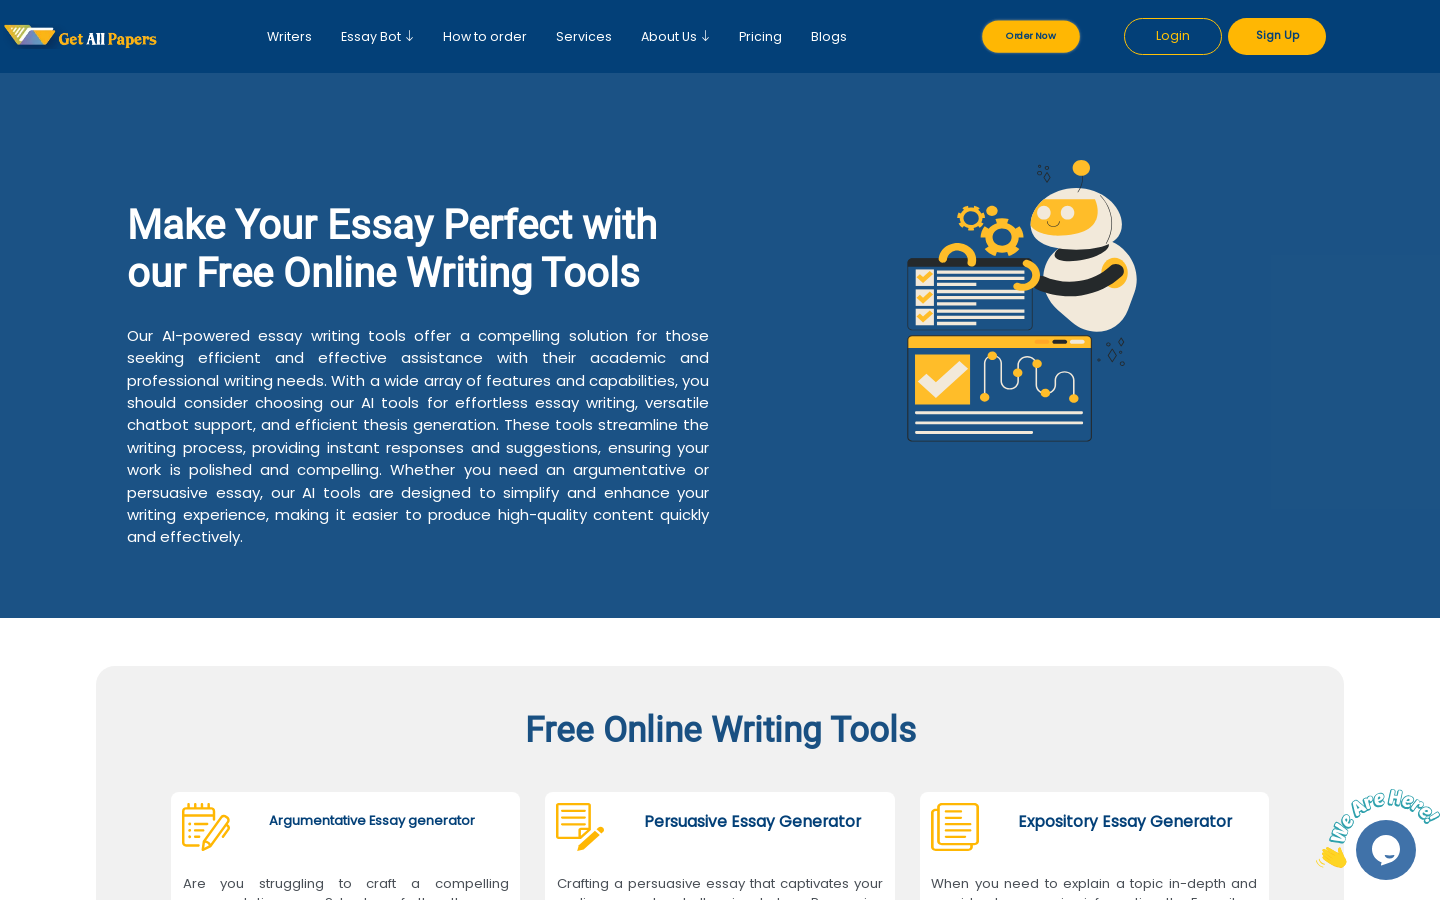 Essay Bot preview